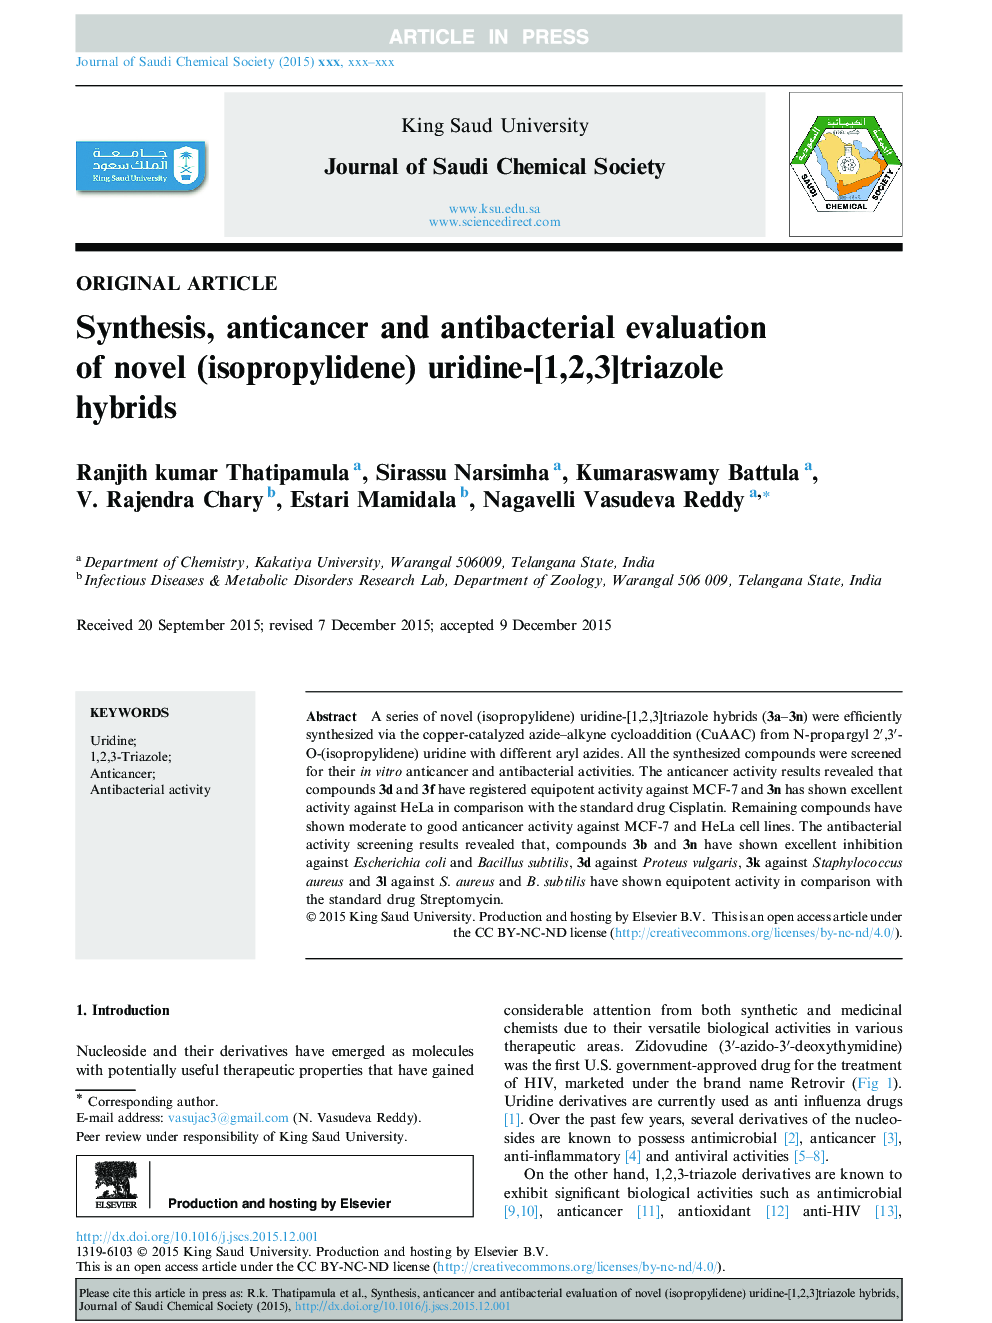 Synthesis, anticancer and antibacterial evaluation of novel (isopropylidene) uridine-[1,2,3]triazole hybrids